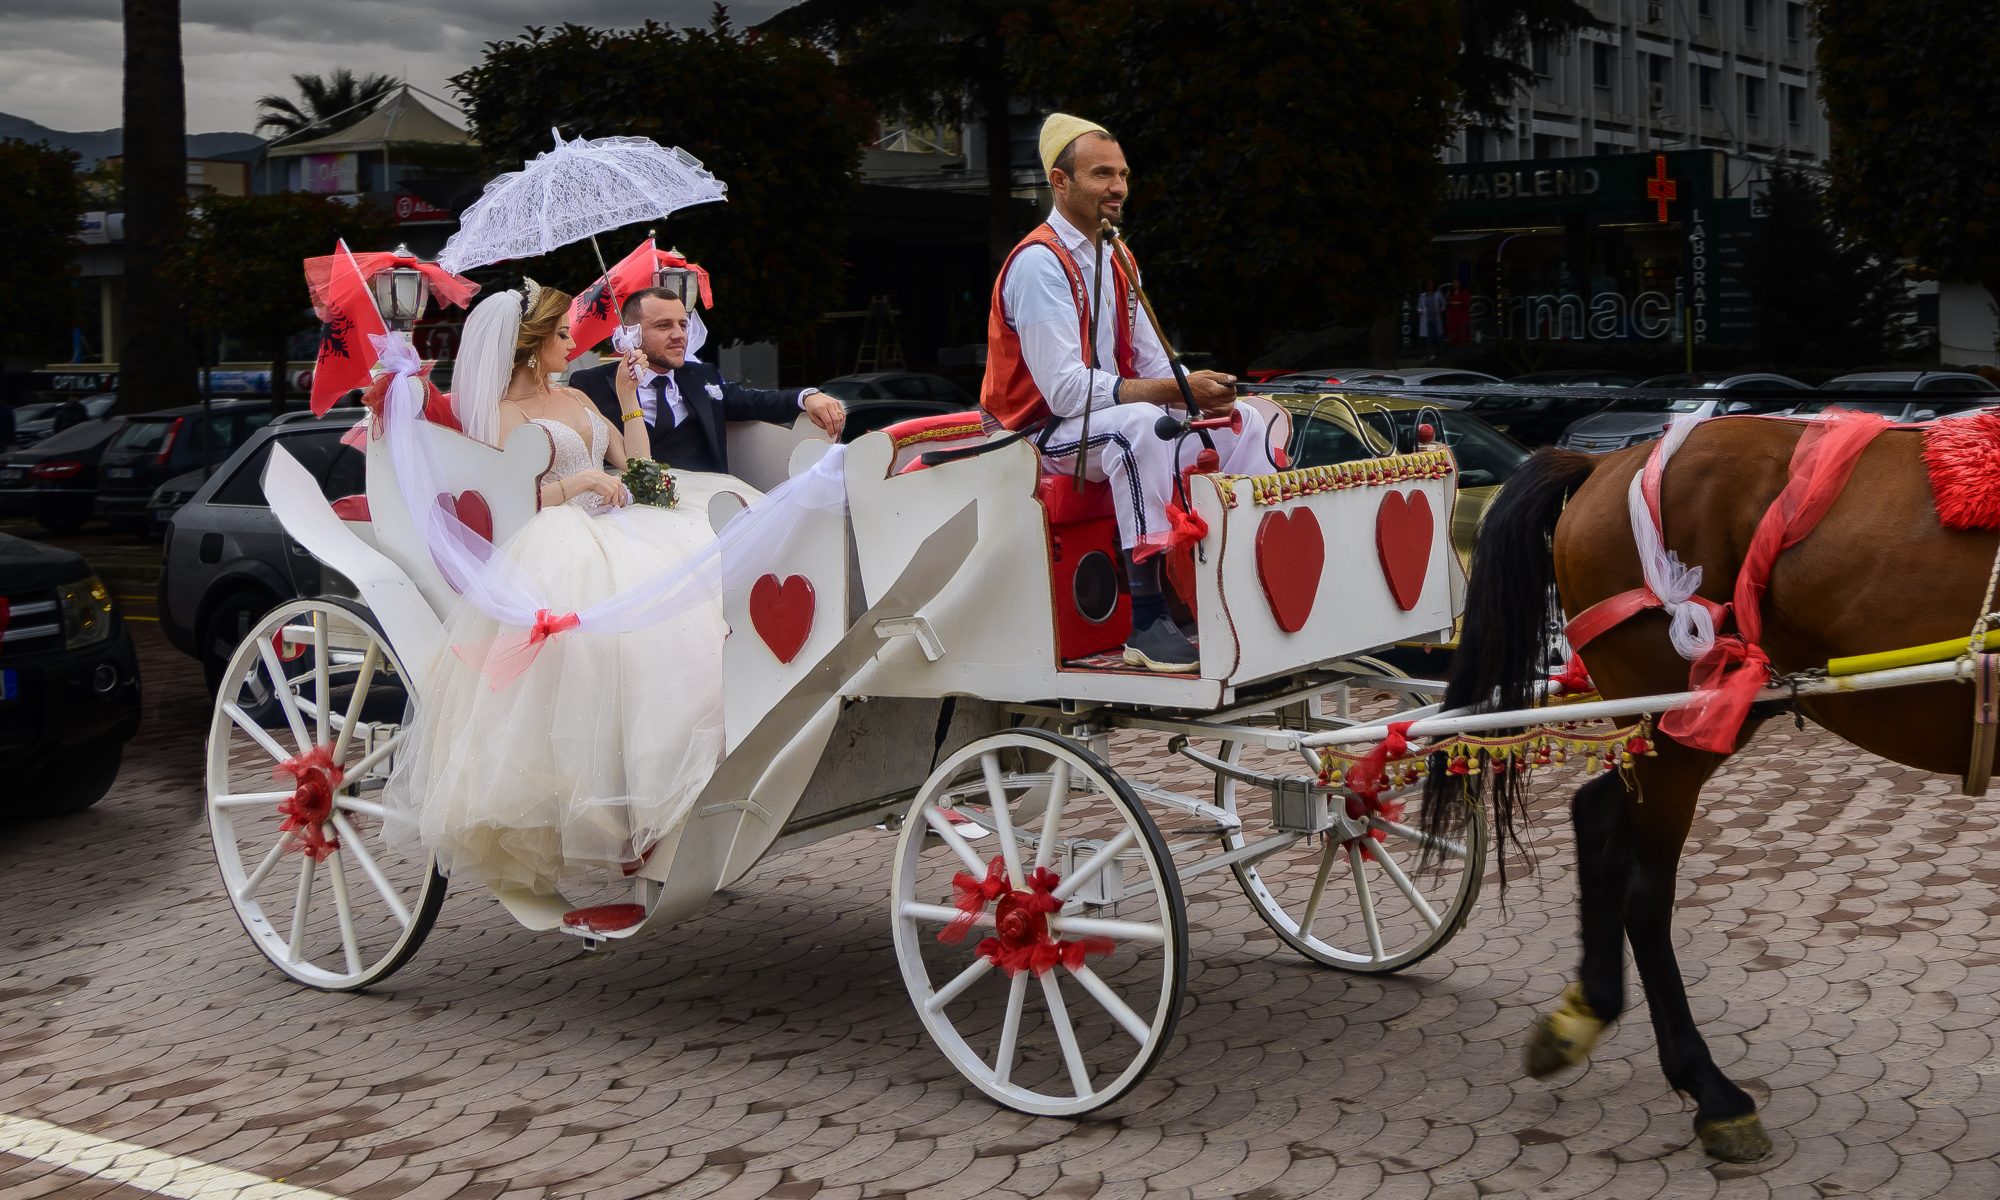 "Newlyweds in a Horse Drawn Carriage"